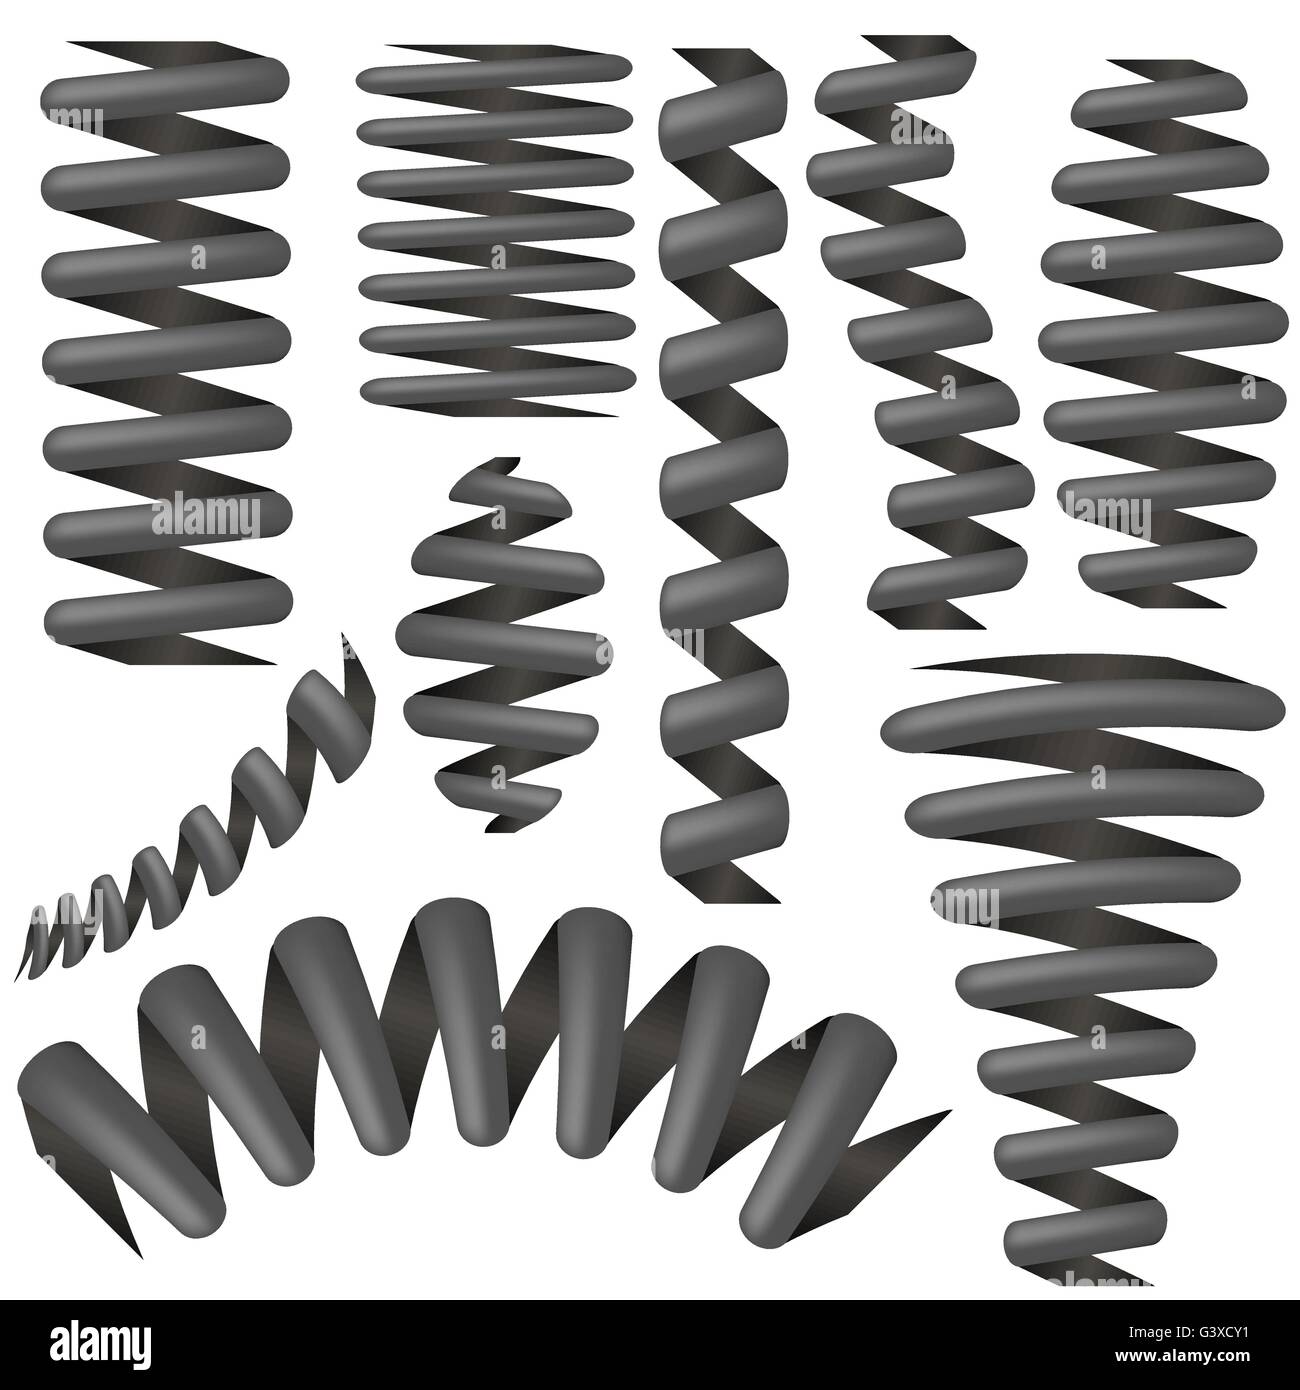 Metallic Springs Collection Isolated Stock Vector